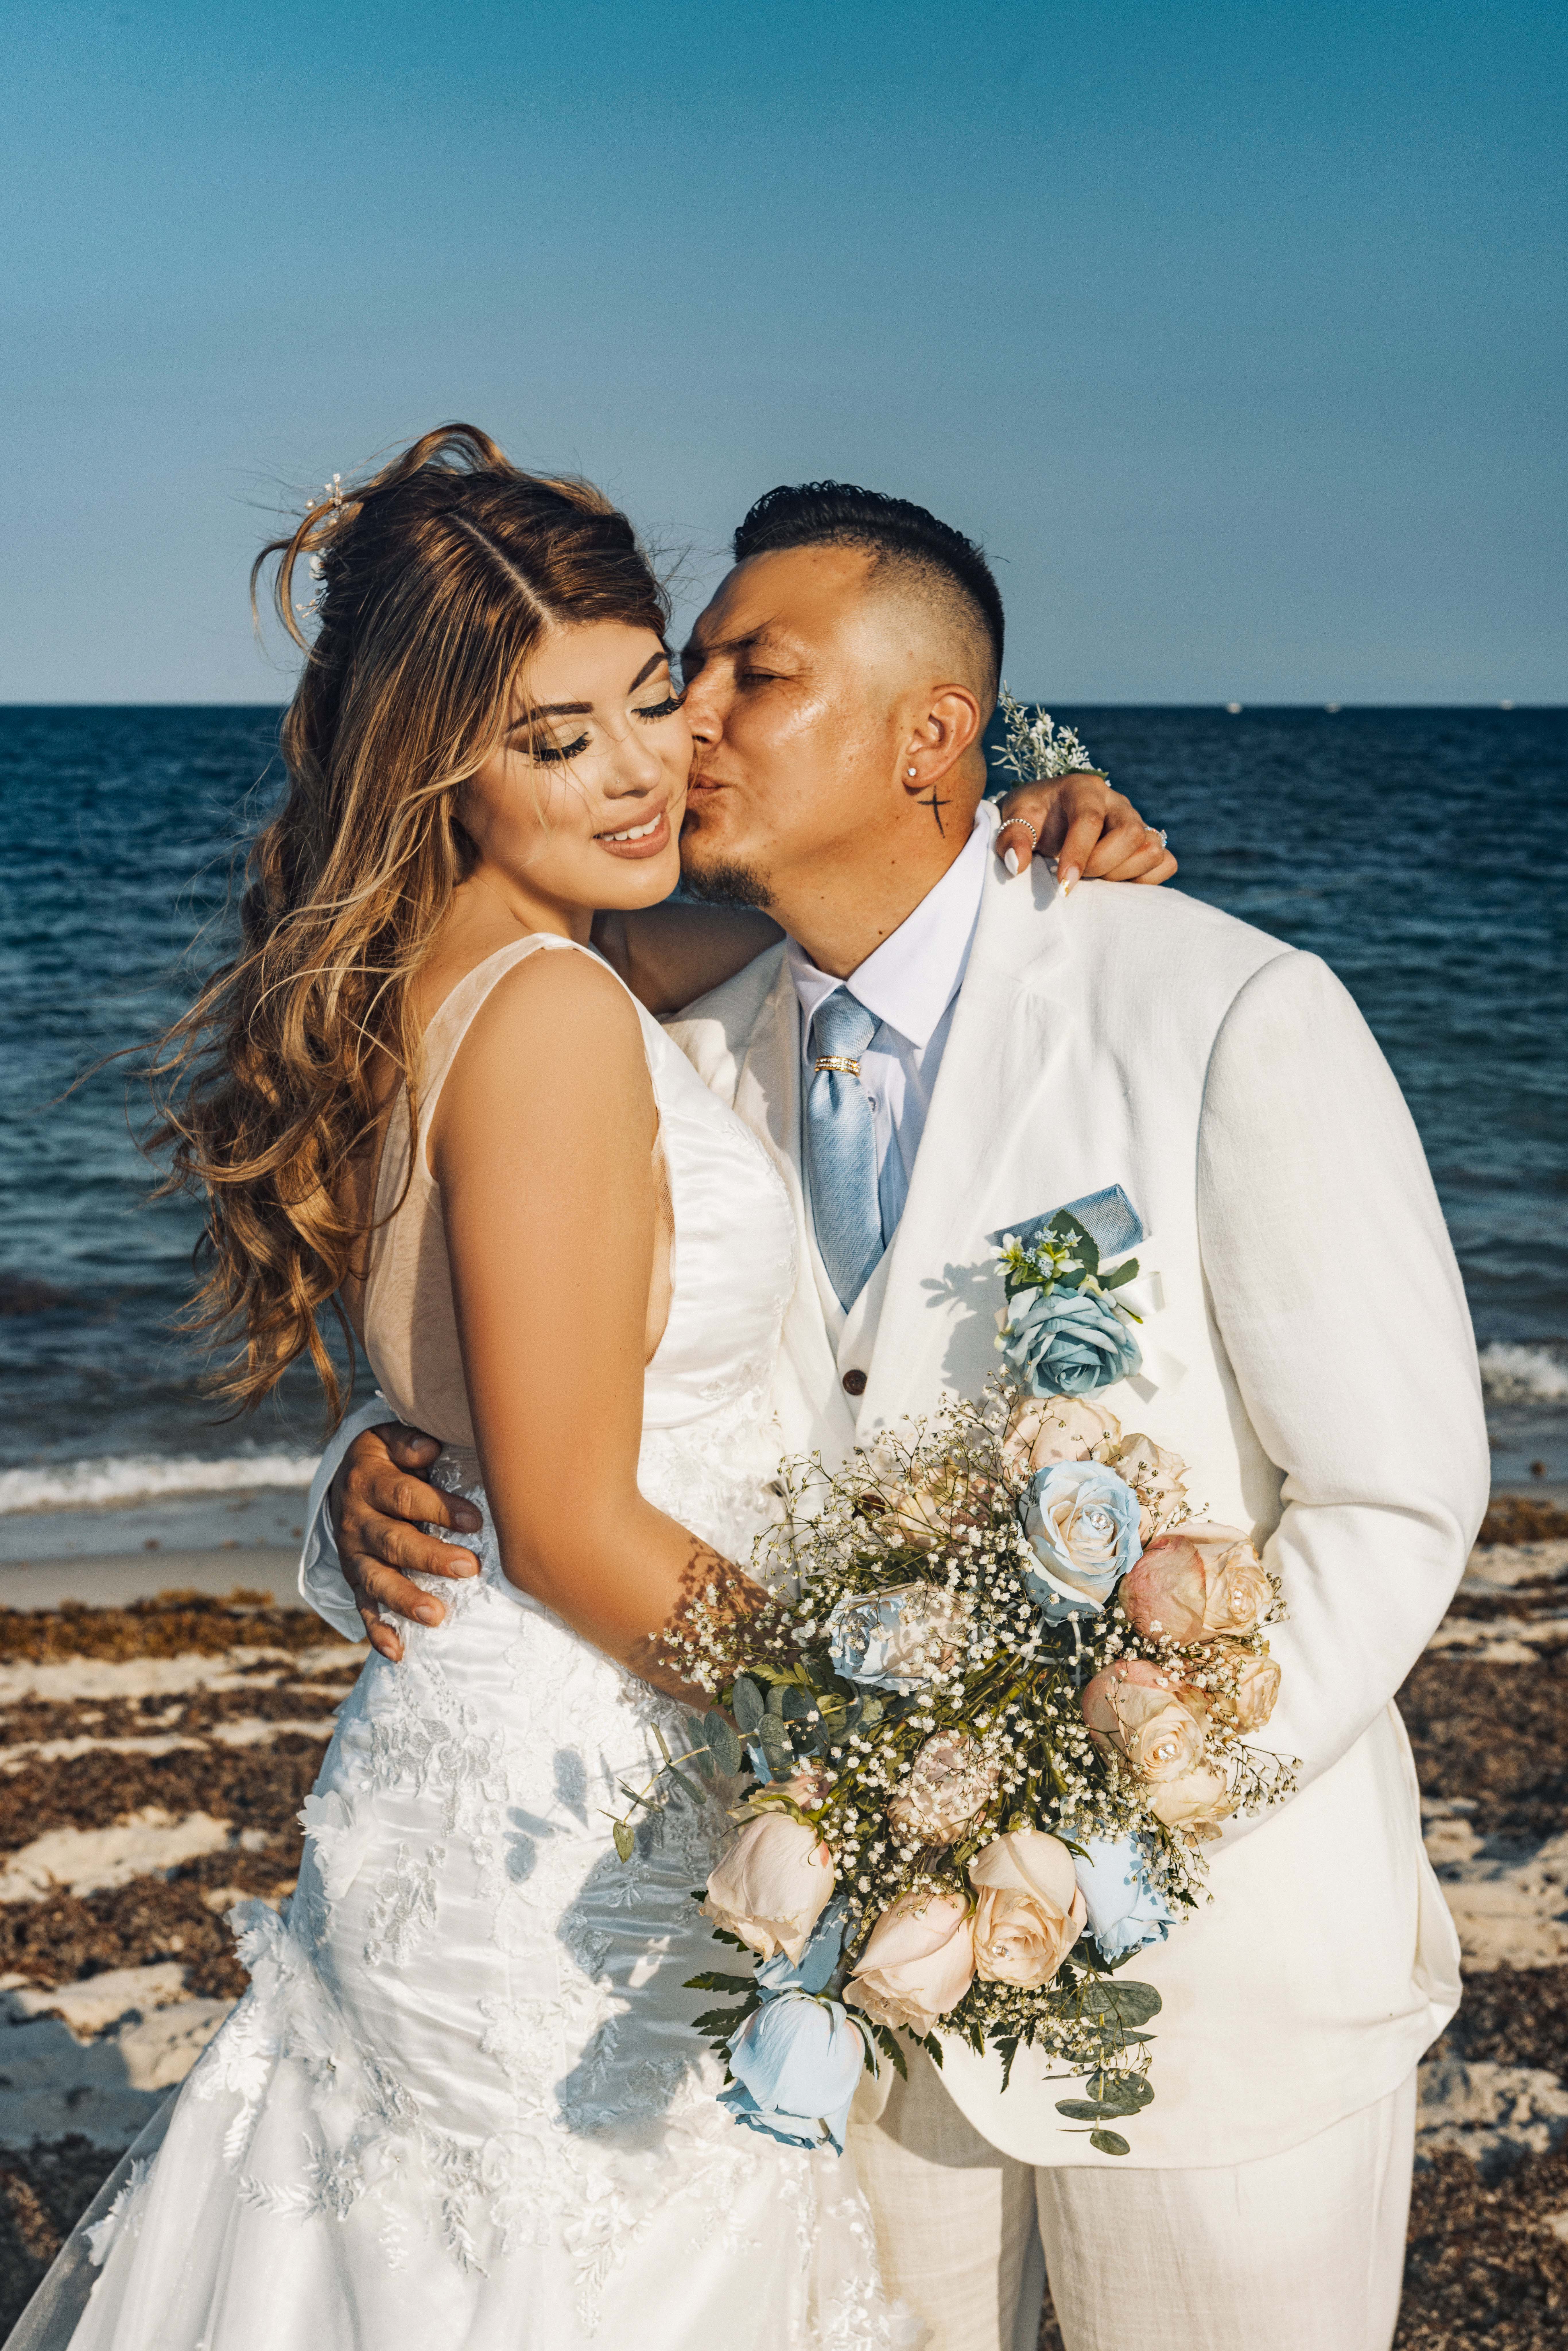 Wedding Photography at the Beach